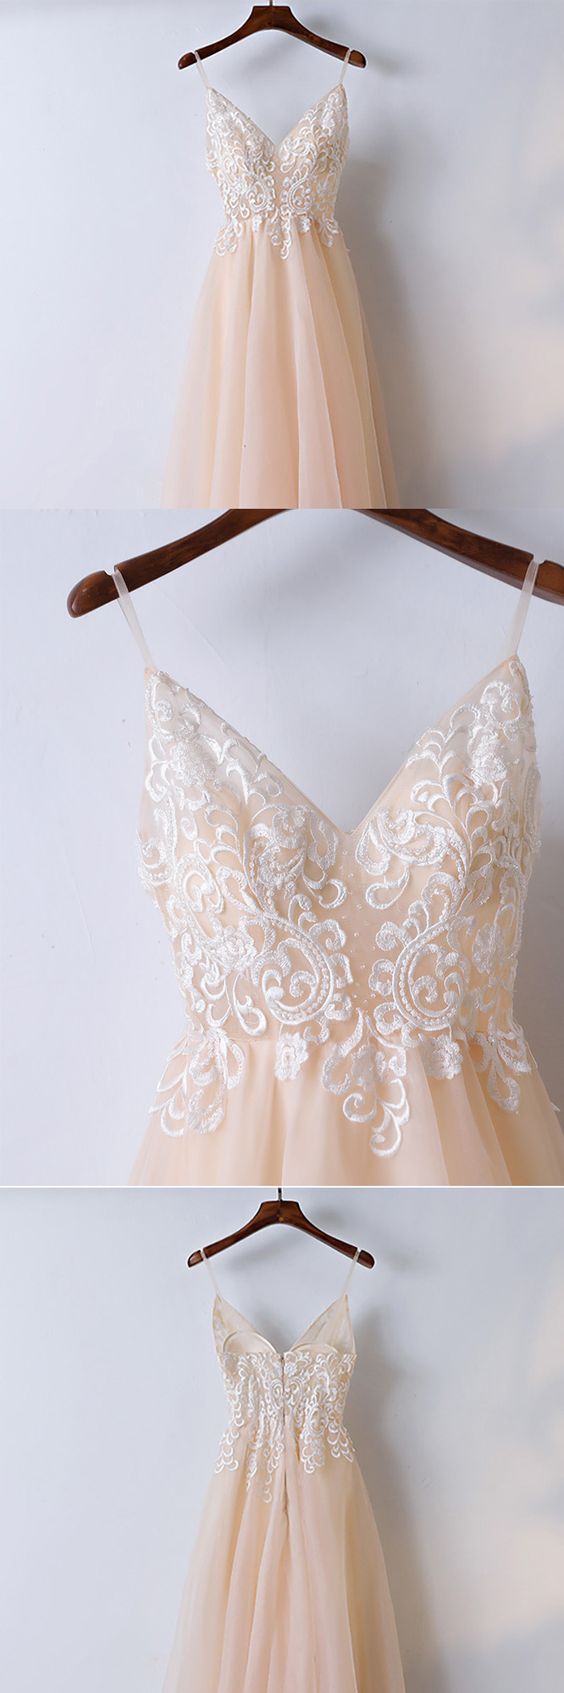 Champagne Prom Dress ,spaghetti Straps Prom Gown, Simple Dress,charming Evening Dress